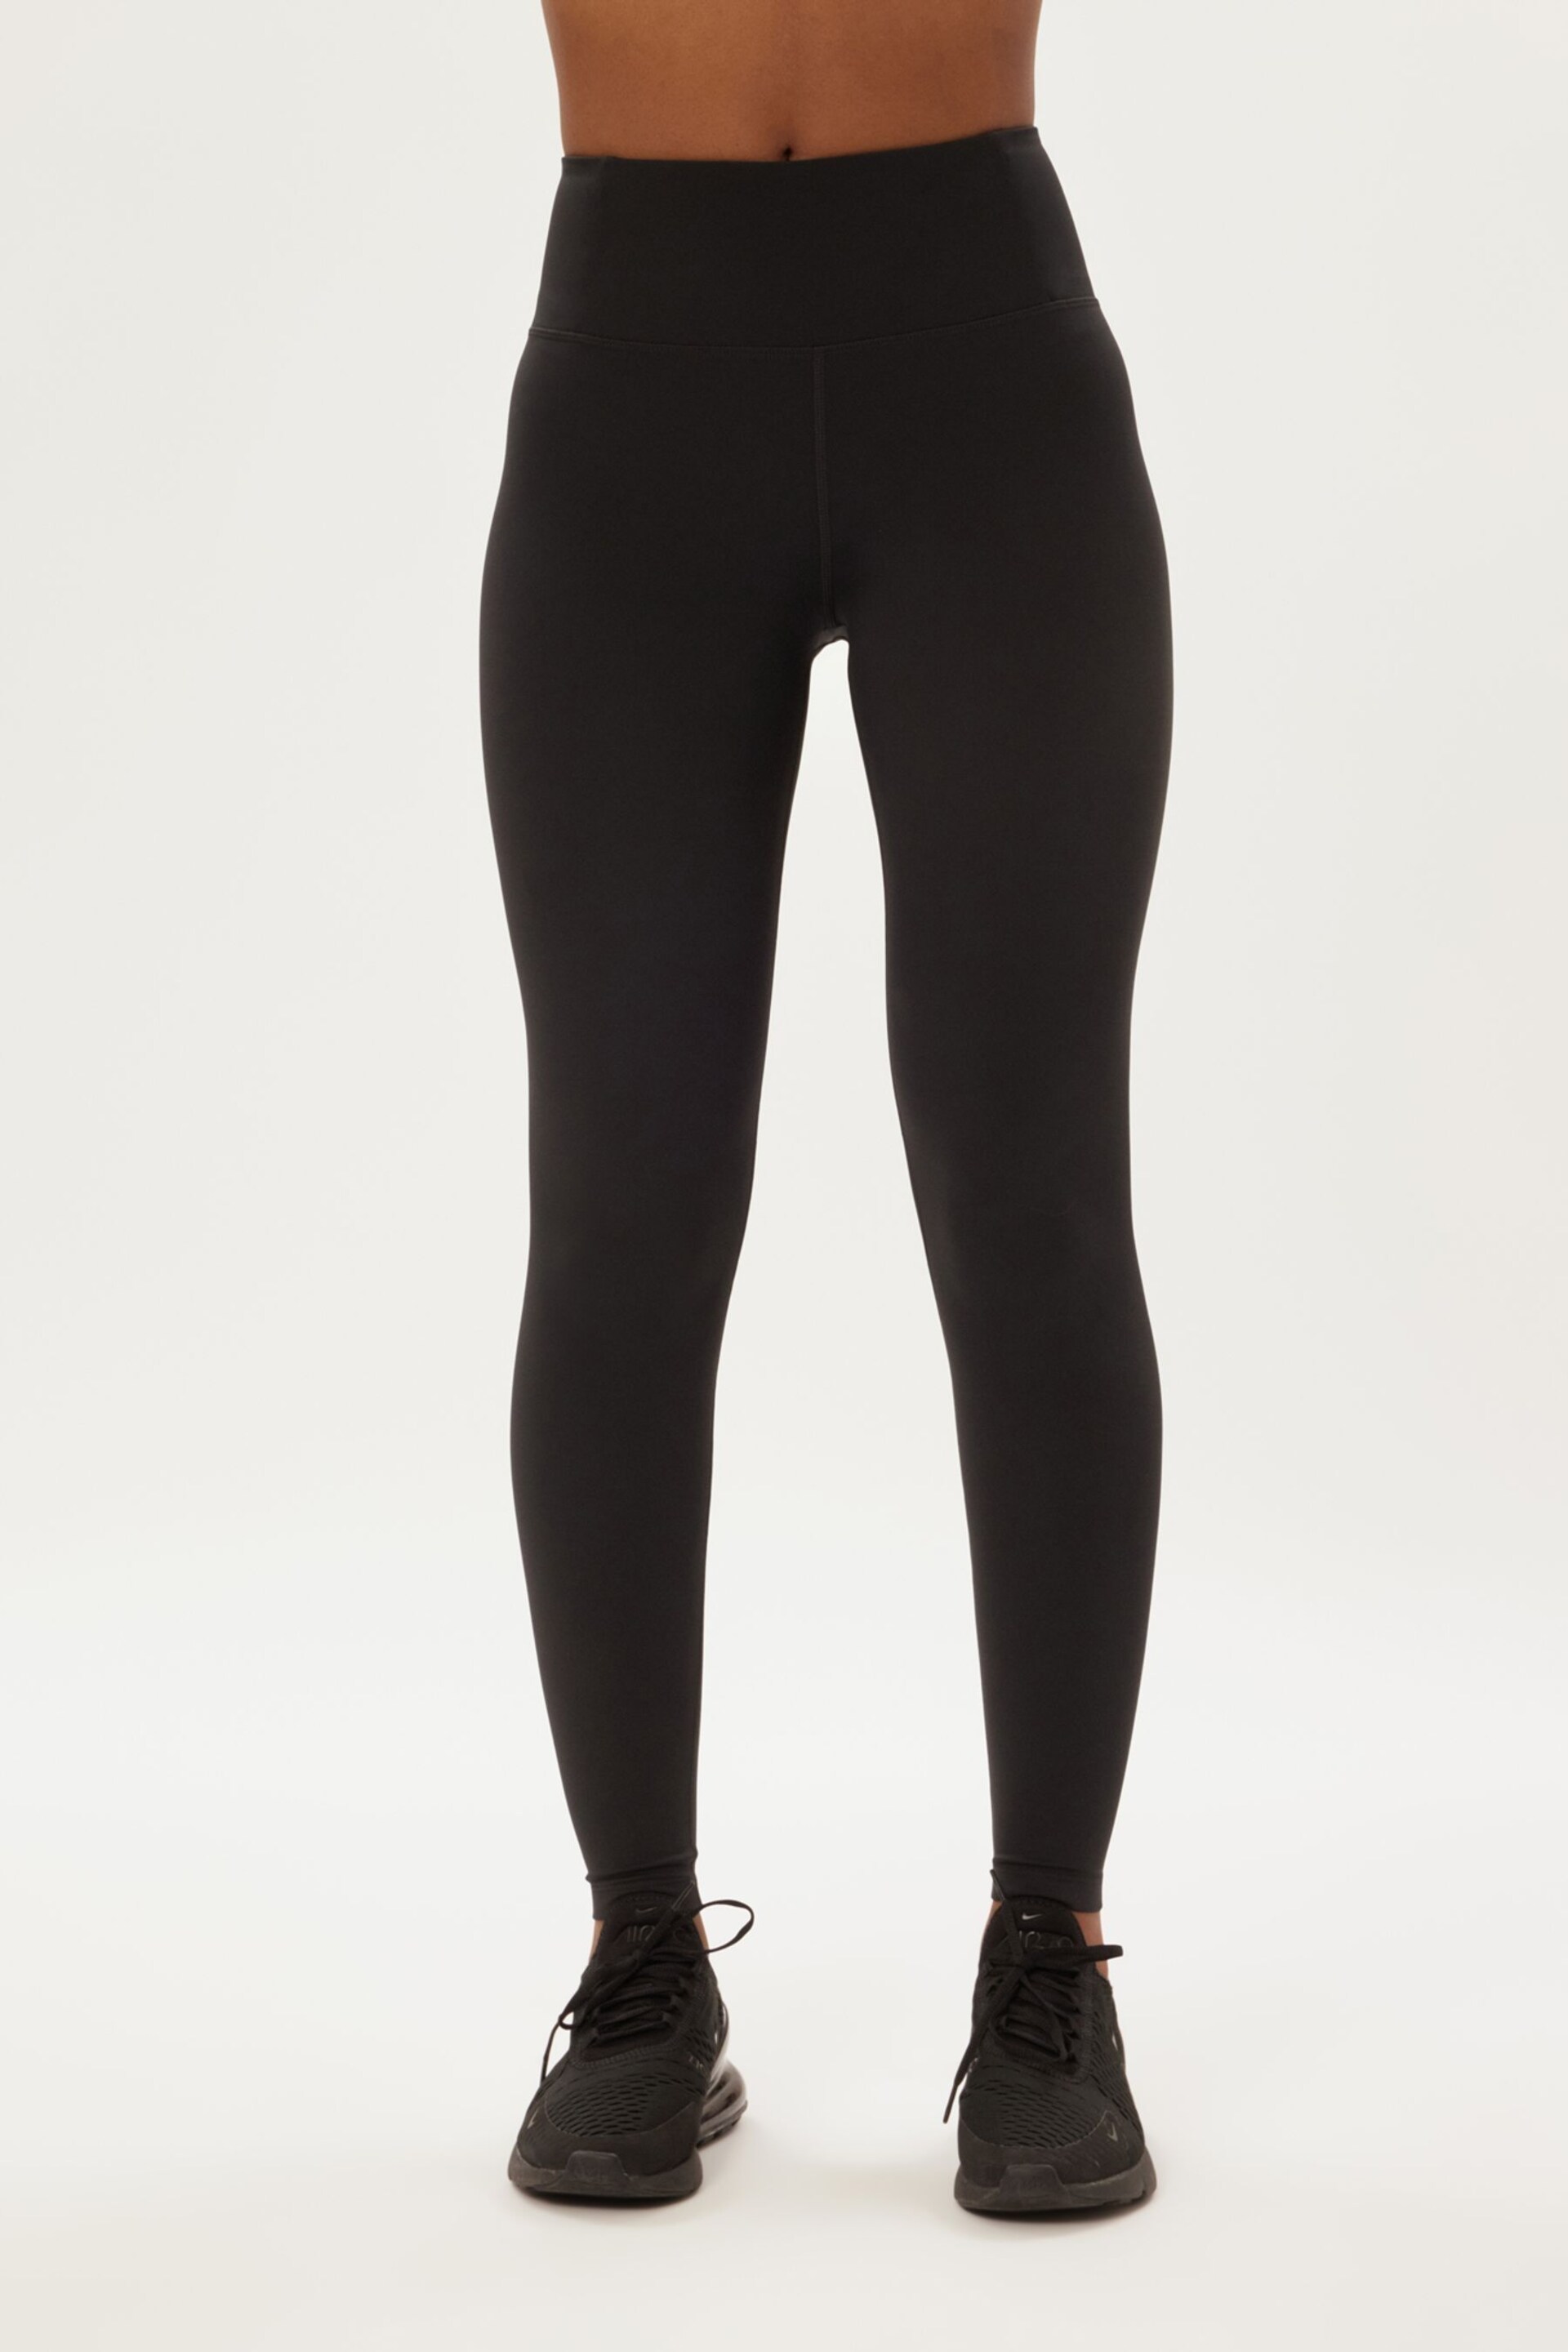 Girlfriend Collective High Rise Compressive Leggings - Image 2 of 6